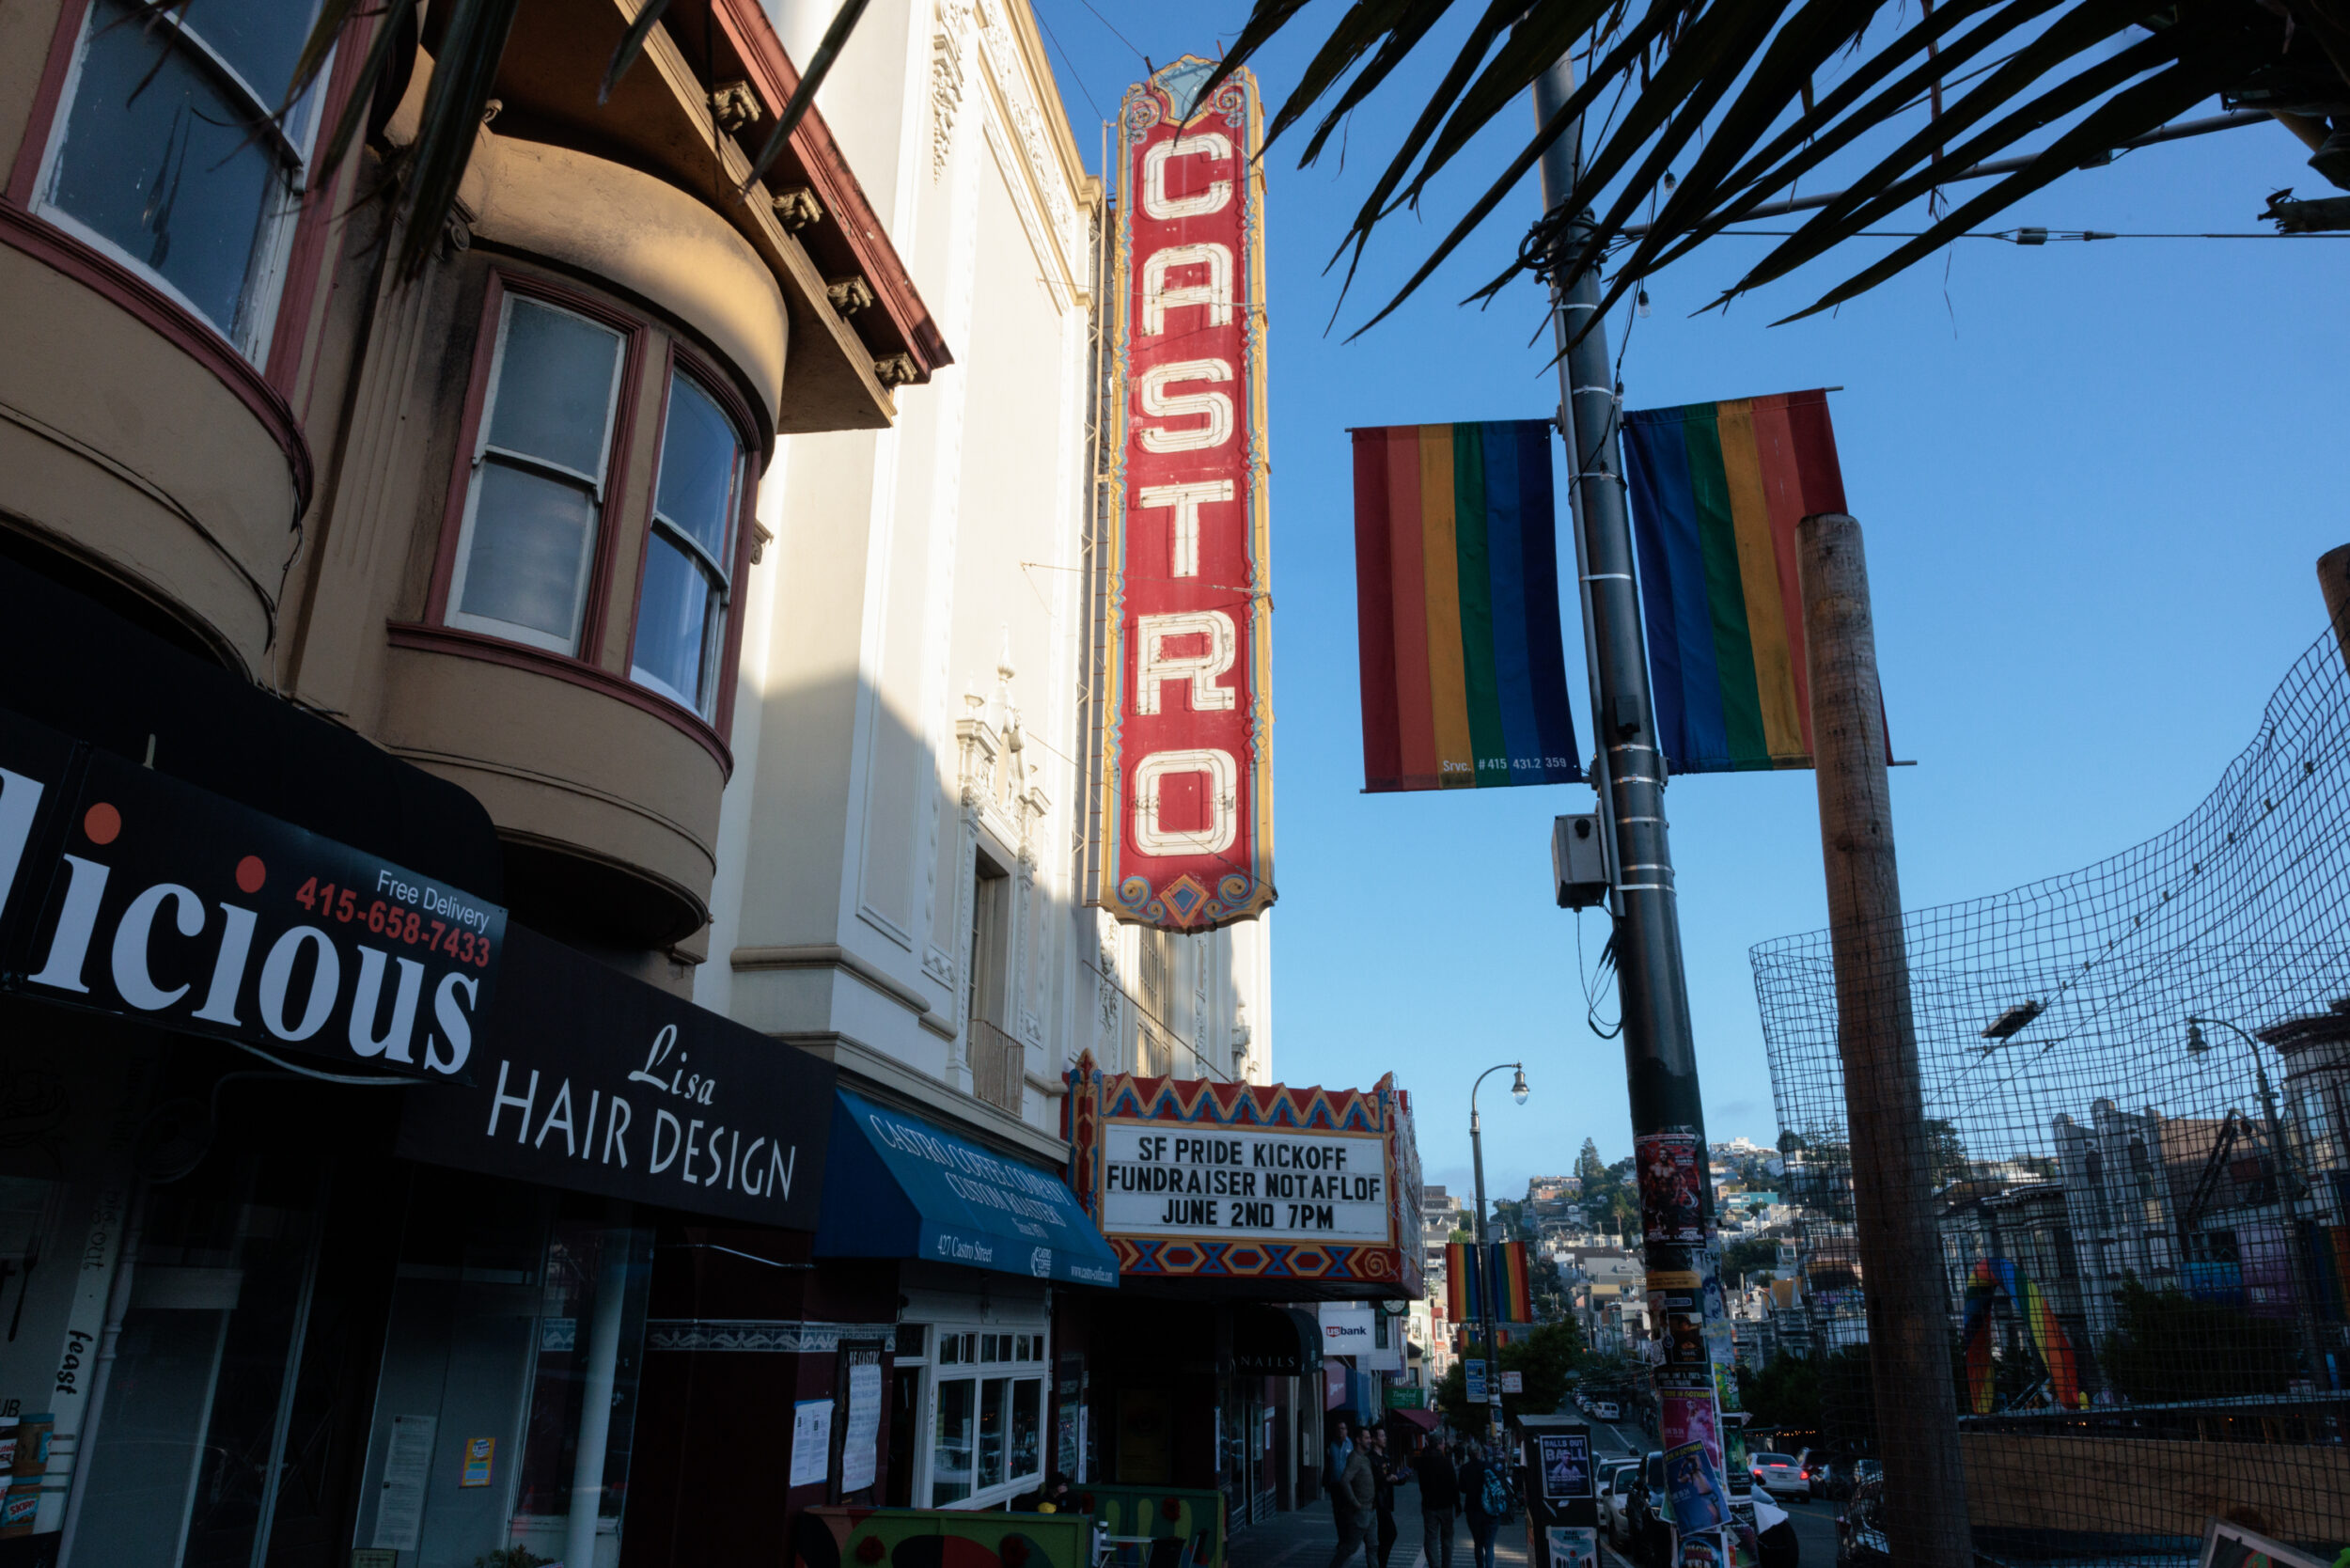 A sign for the Castro theatre illuminated by sunlight.